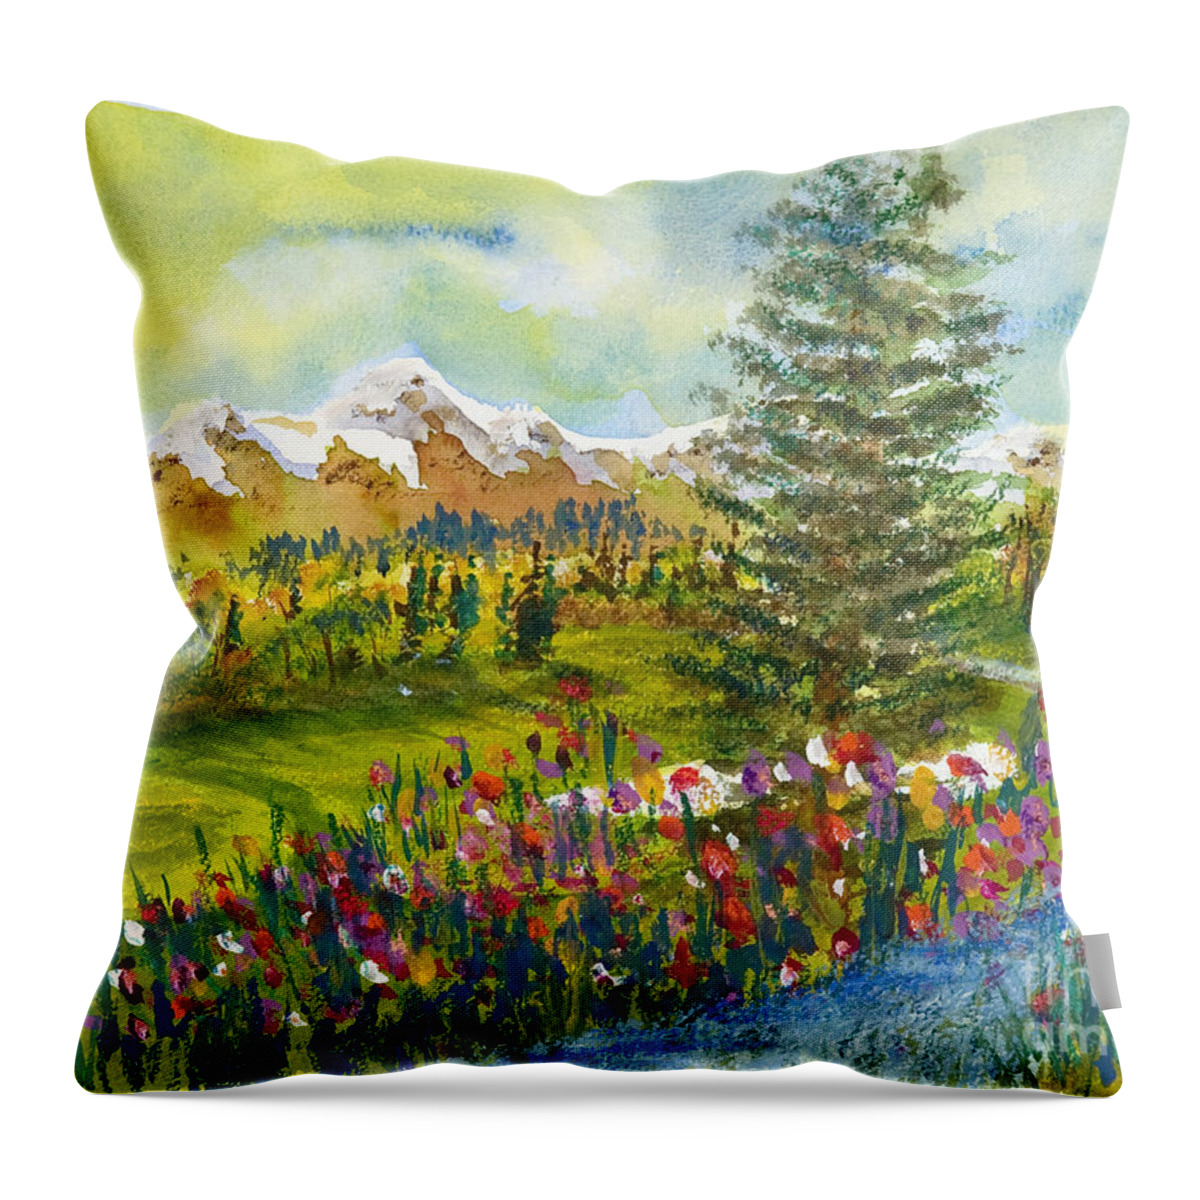 Golf Throw Pillow featuring the painting The Ninth Hole by Walt Brodis